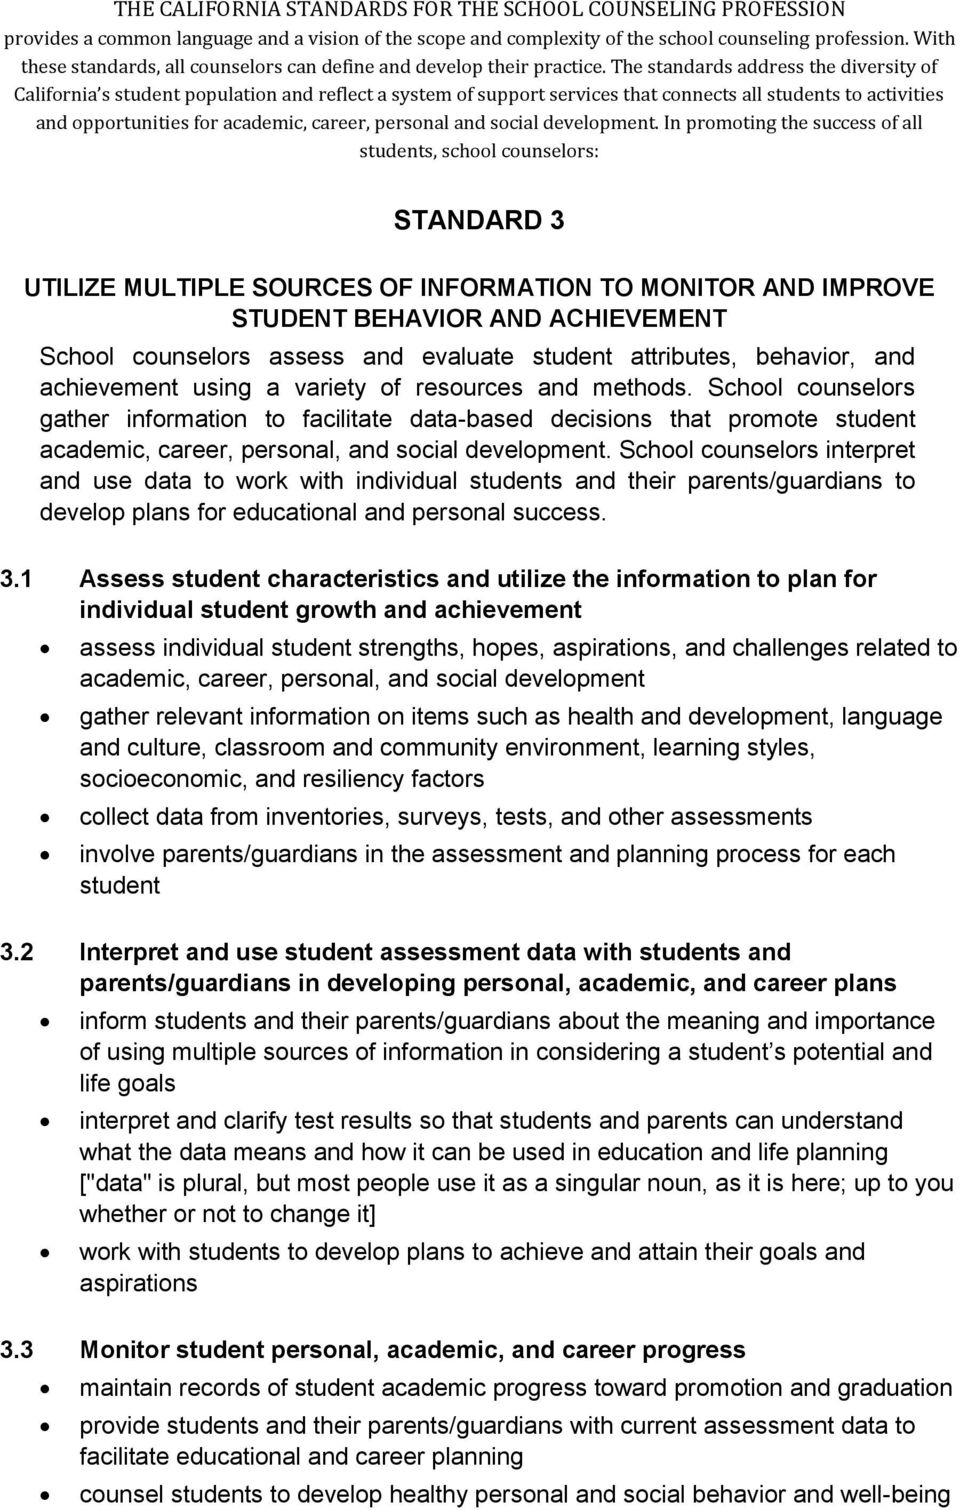 School counselors interpret and use data to work with individual students and their parents/guardians to develop plans for educational and personal success. 3.